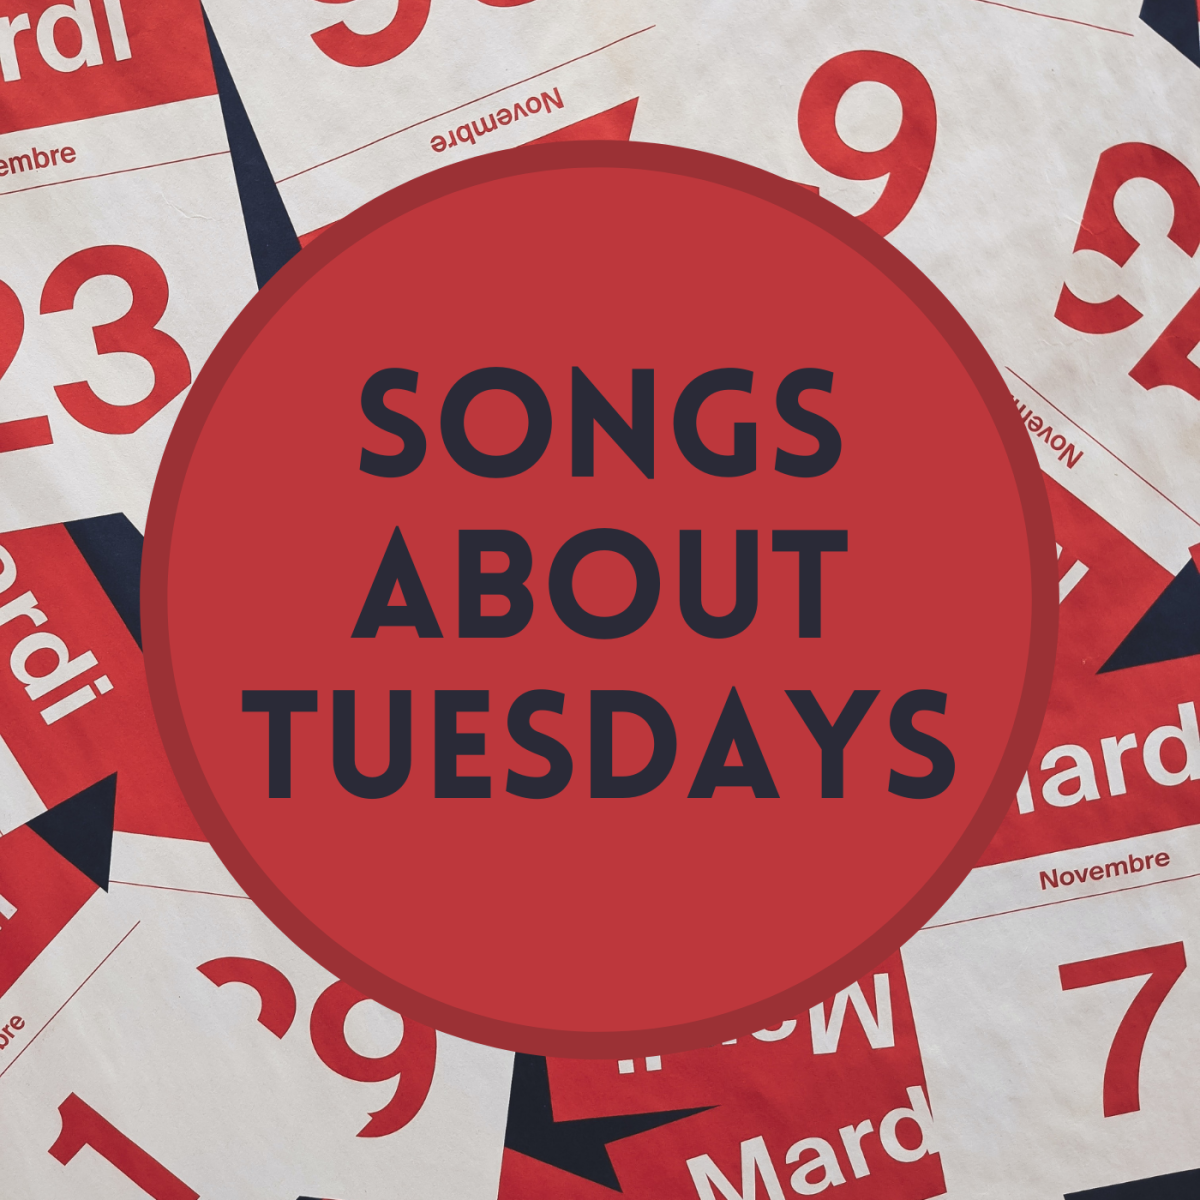 Celebrate Tuesday every day with this playlist of songs!